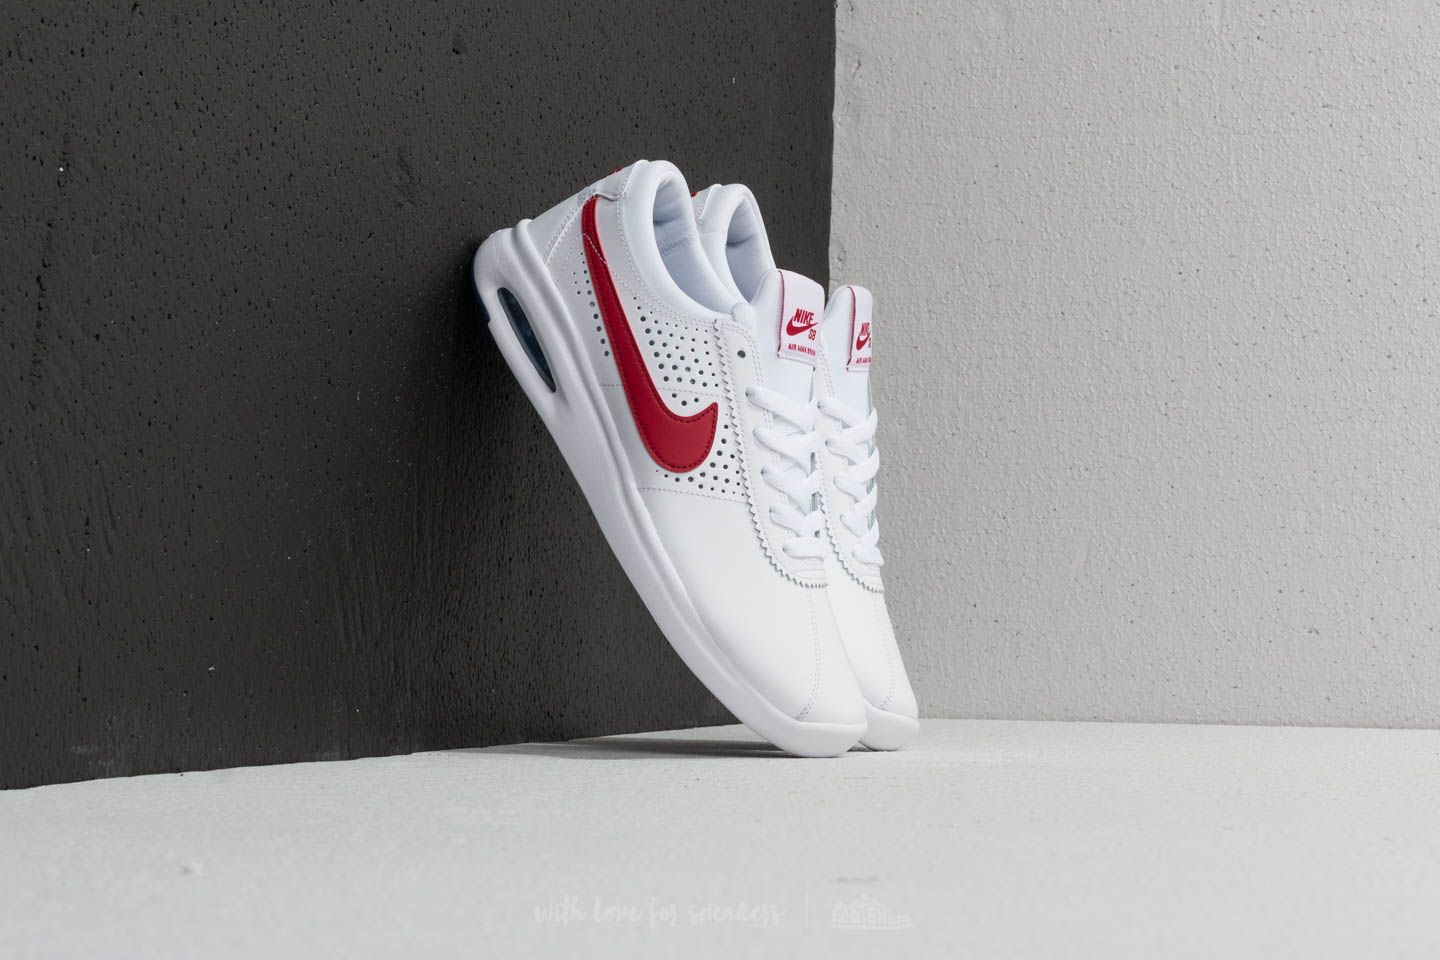 Chaussures et baskets homme Nike SB Air Max Bruin Vapor White/ Gym Red/  Game Royal | Footshop